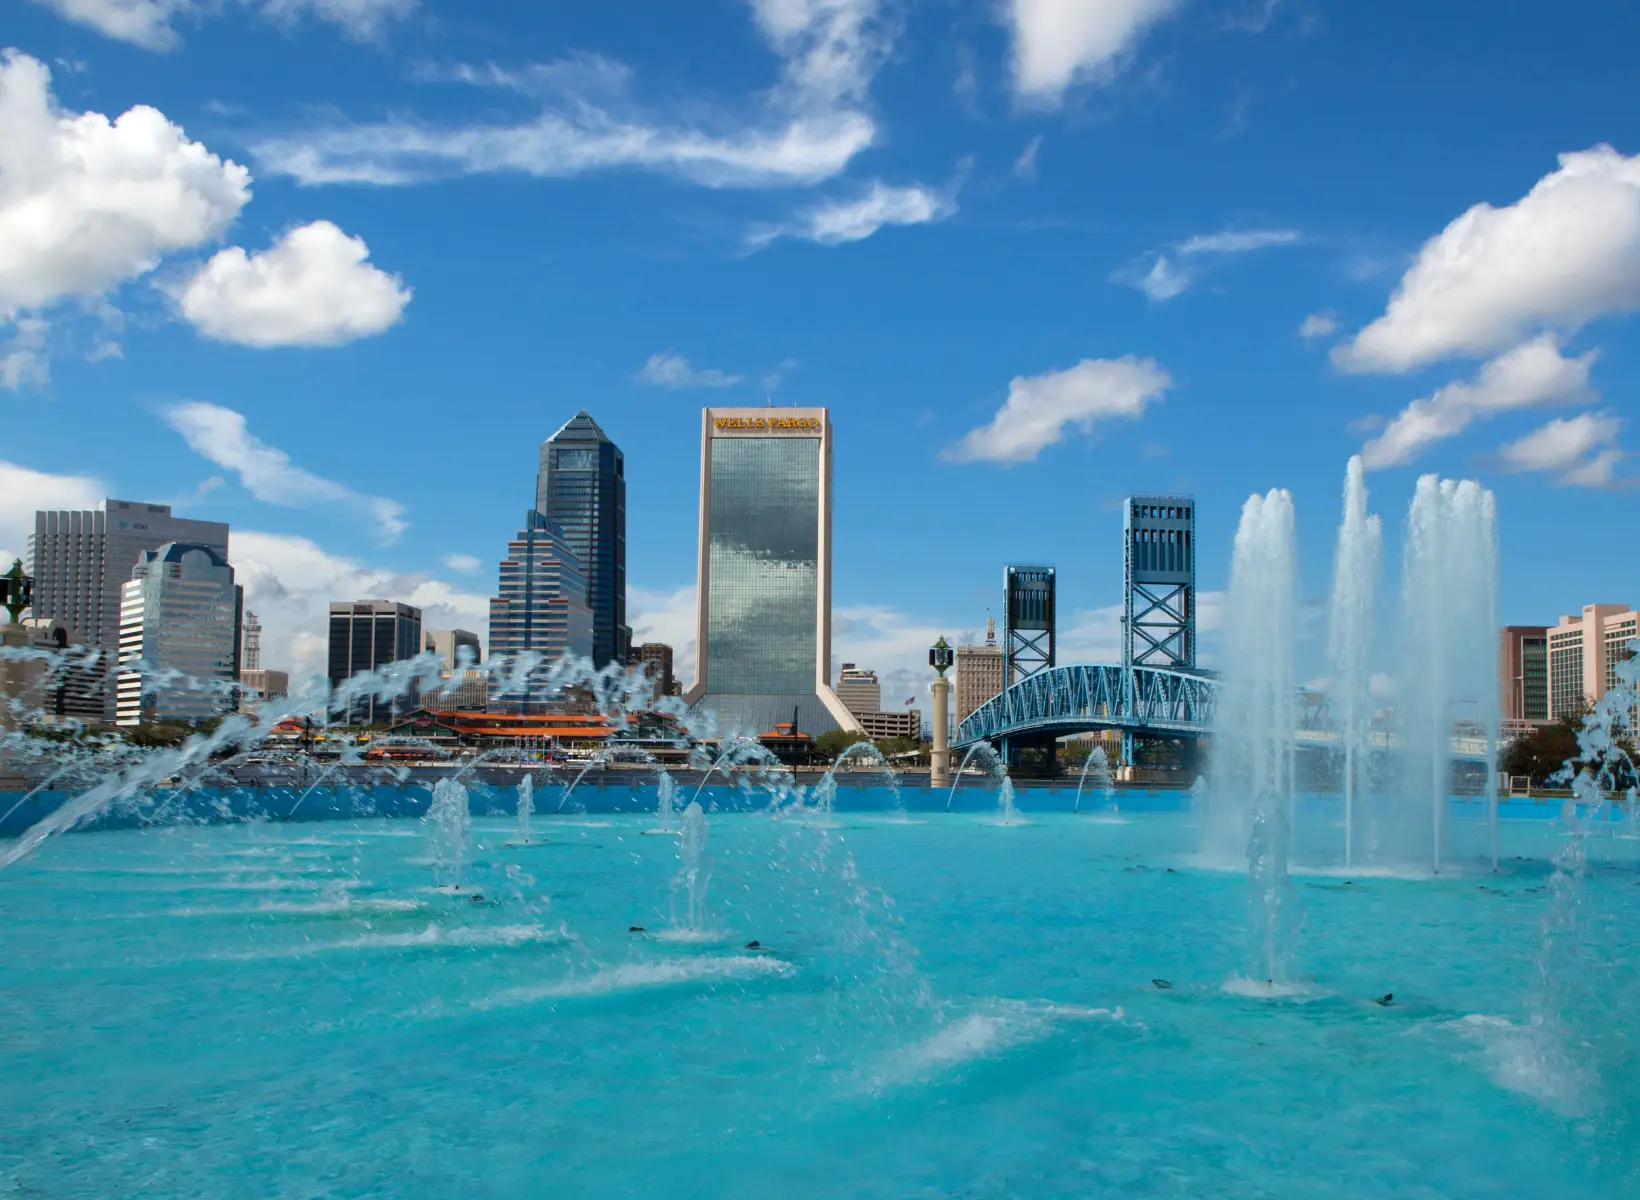 Is Jacksonville worth visiting